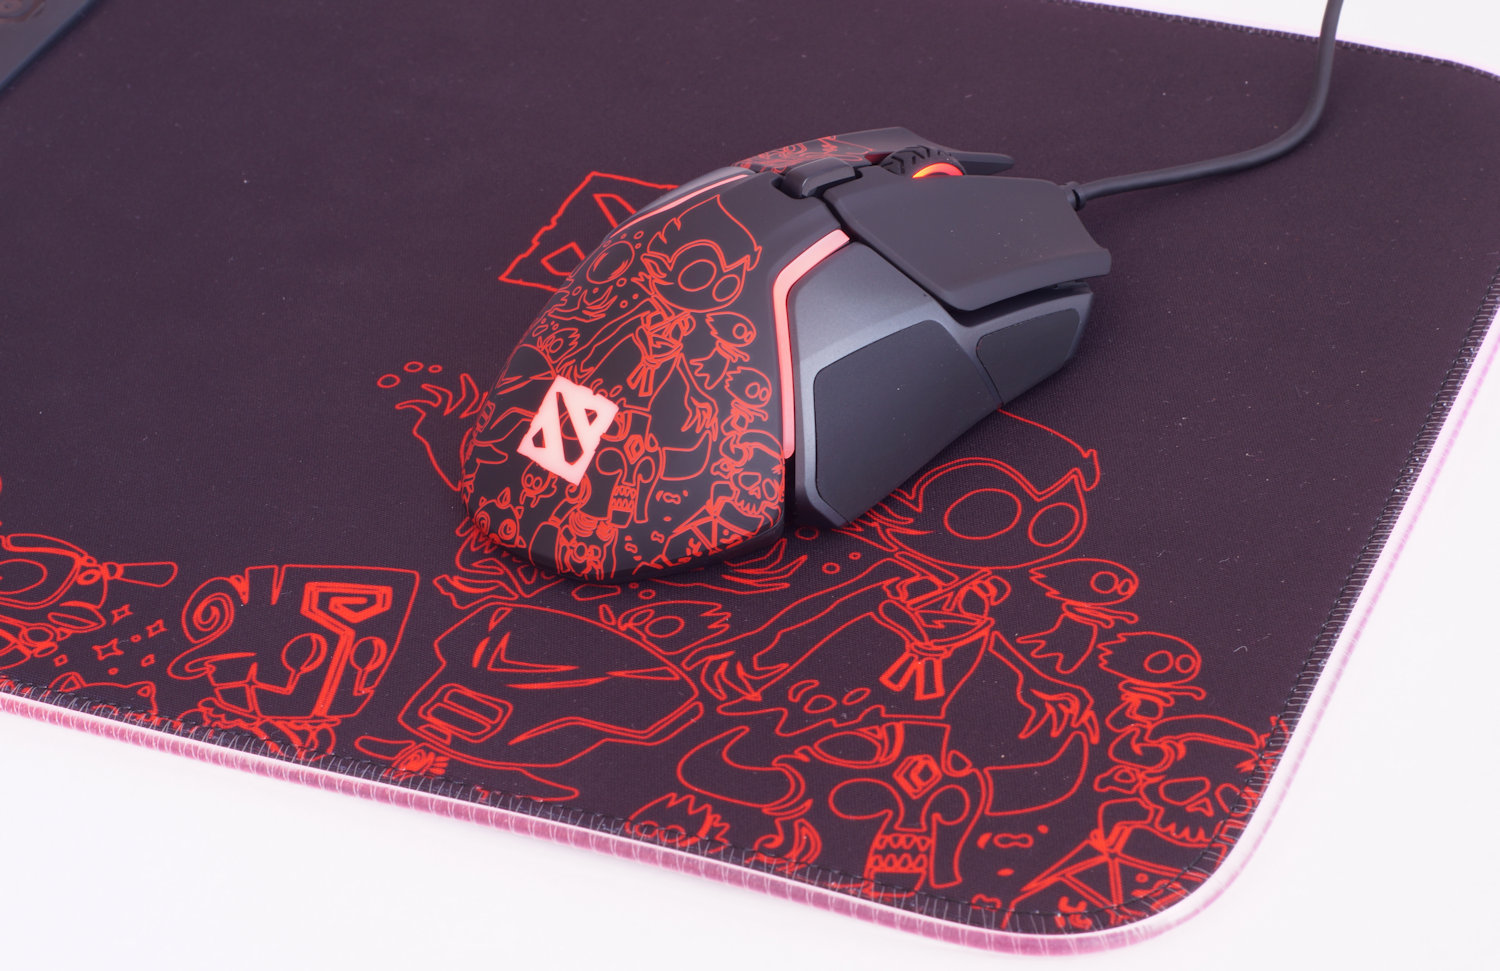 Steelseries rival dota edition фото 42